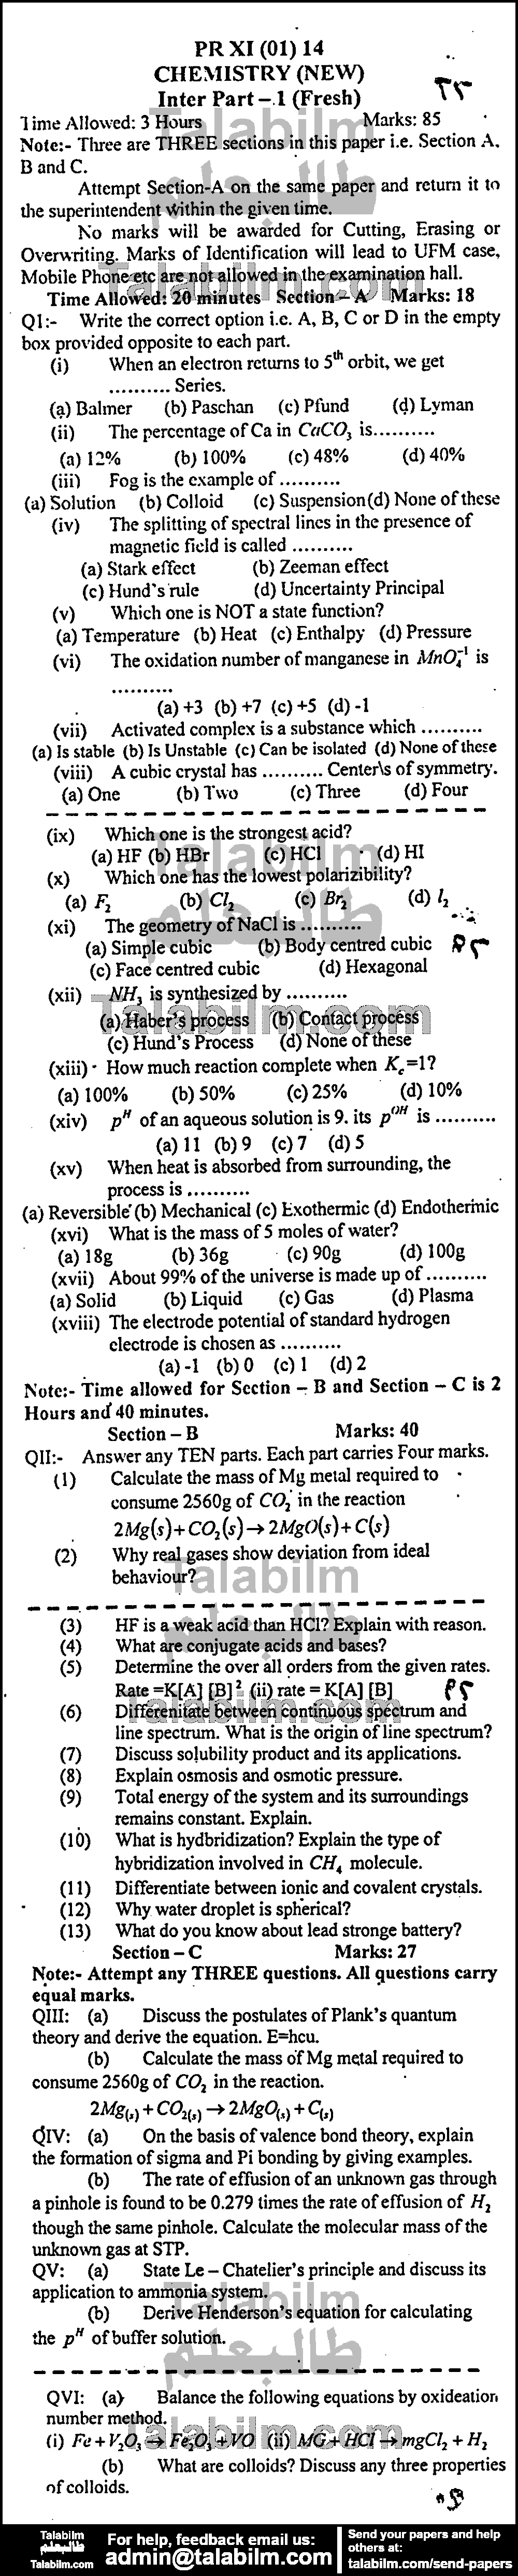 Chemistry 0 past paper for Group-I 2014